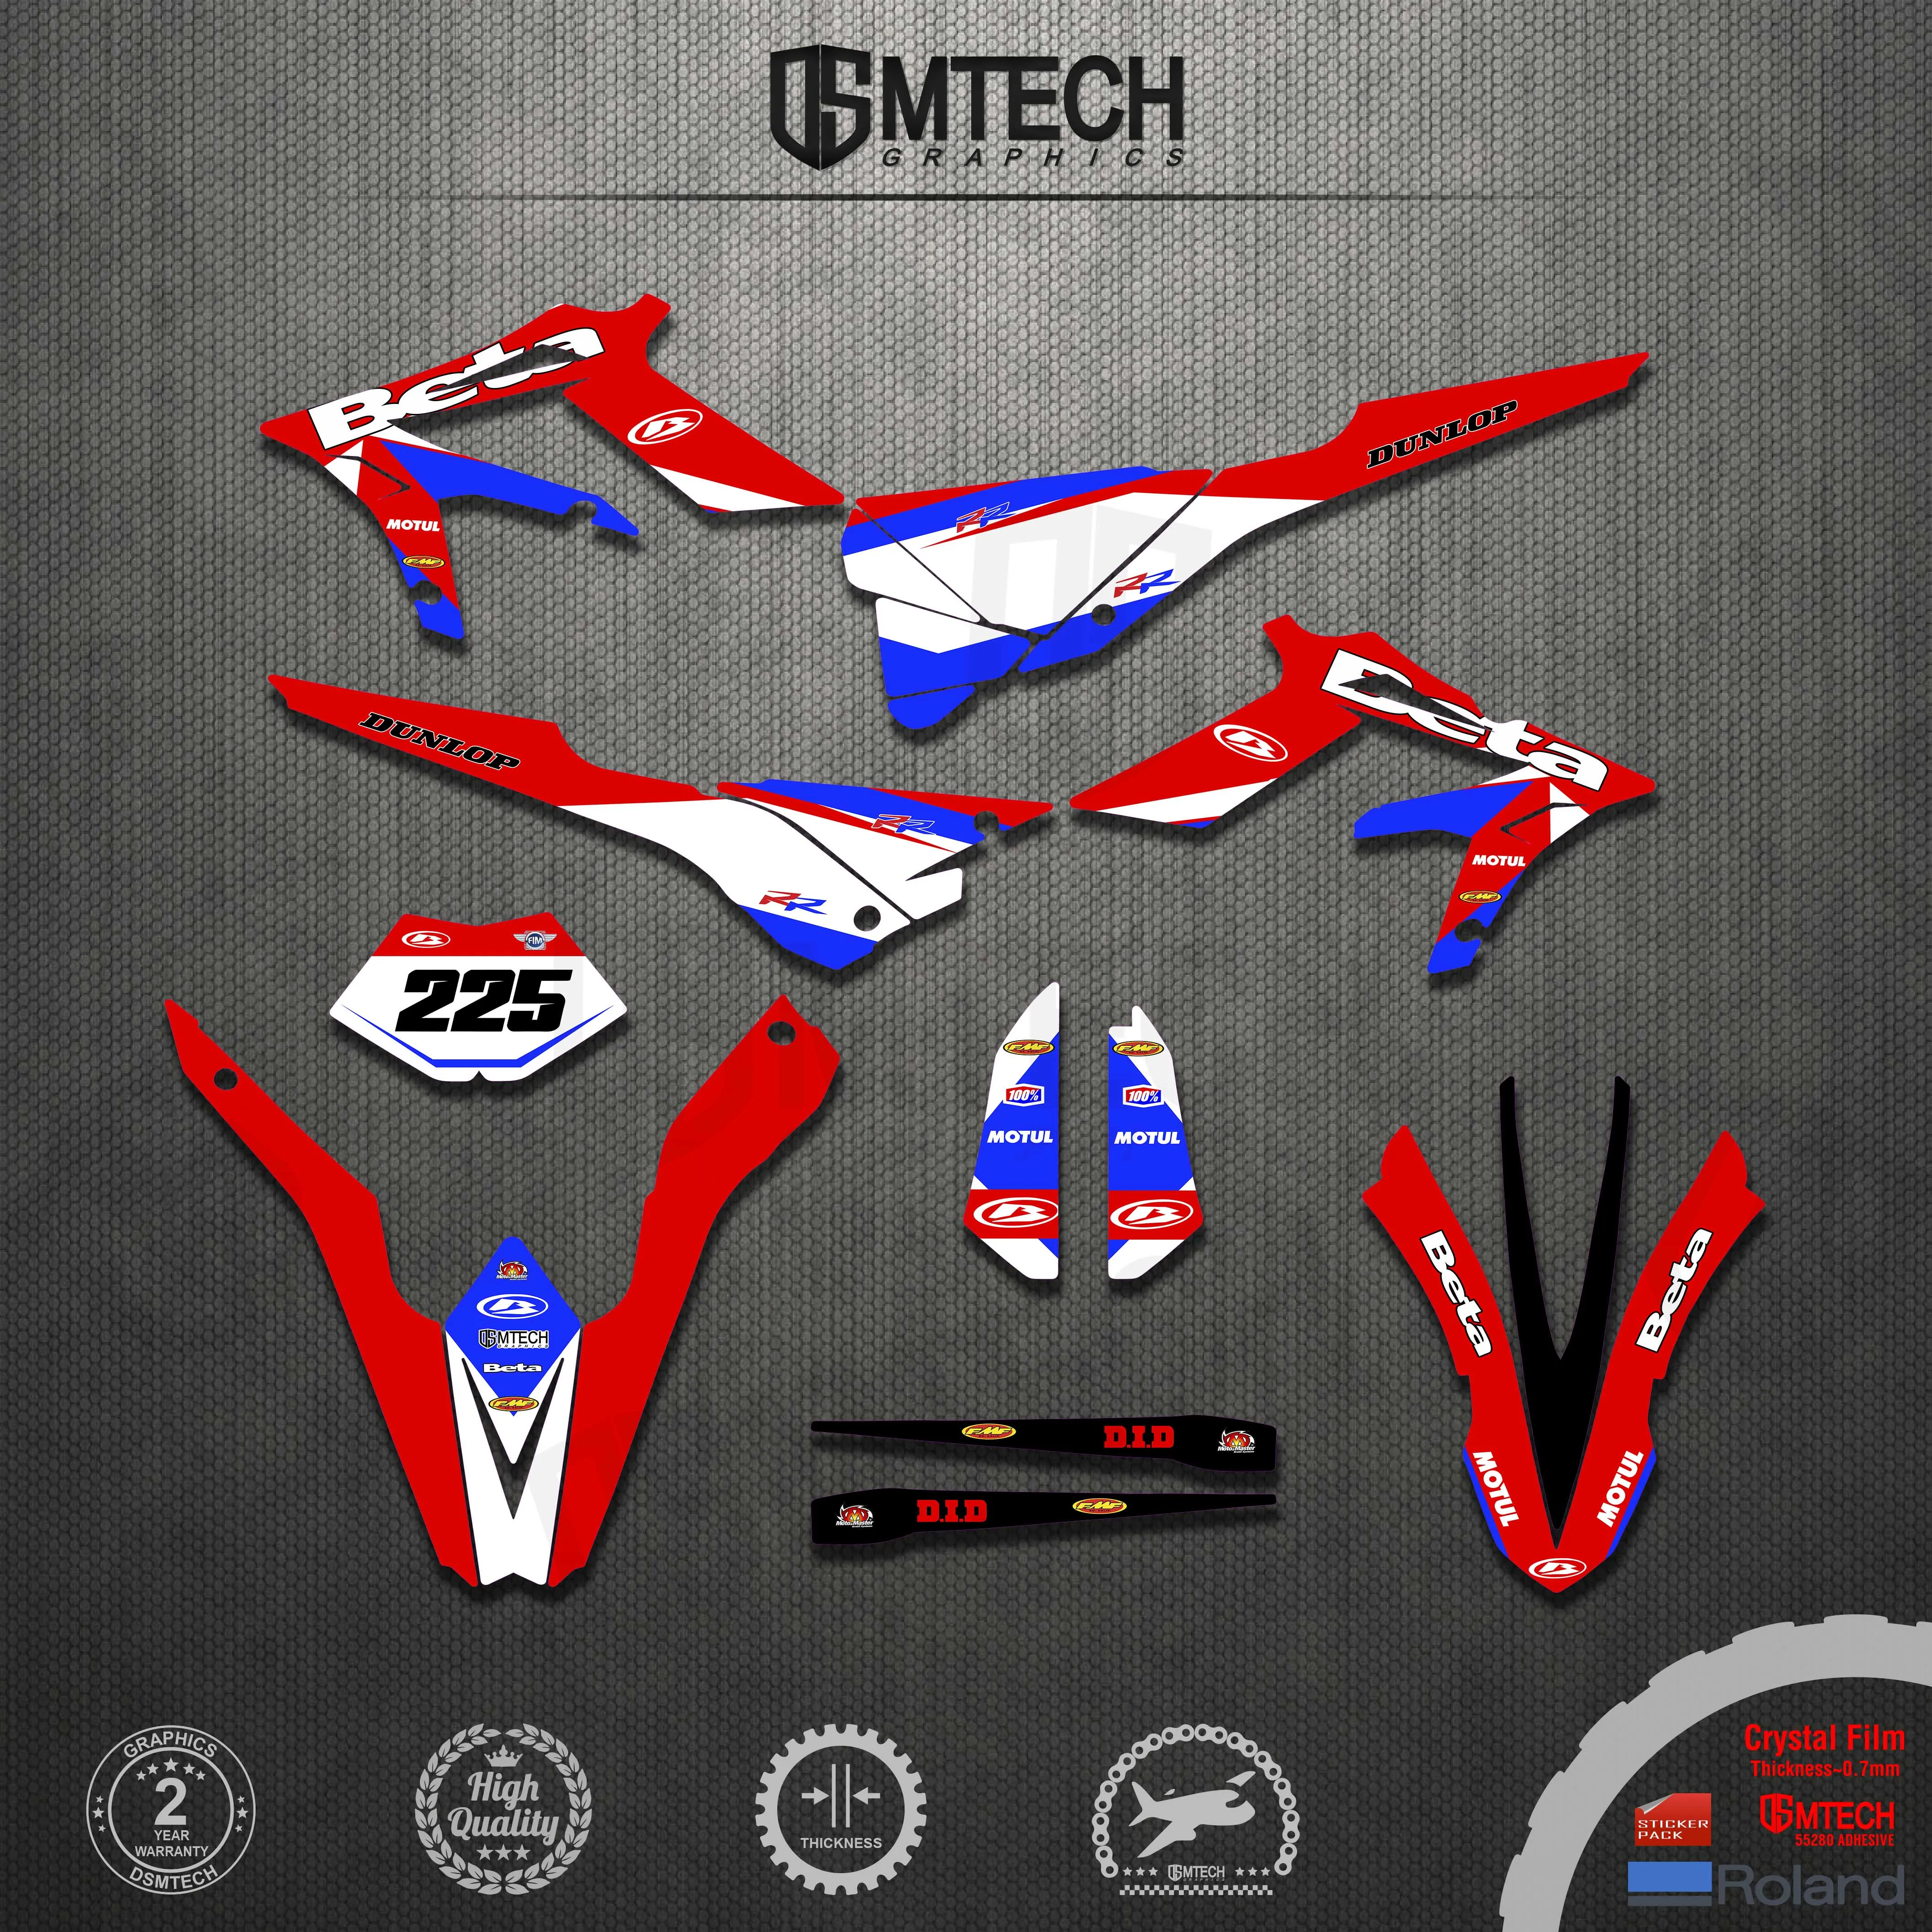 DSMTECH  Motorcycle Team Graphic Decal & Sticker Kit For BETA Xtrainer 2015-2019 2015 2016 2017 2018 2019 Graphic tmt new style team graphics decal sticker deco for beta x trainer xtrainer 250 300 350 400 450 2016 2017 2018 2019 2016 2019